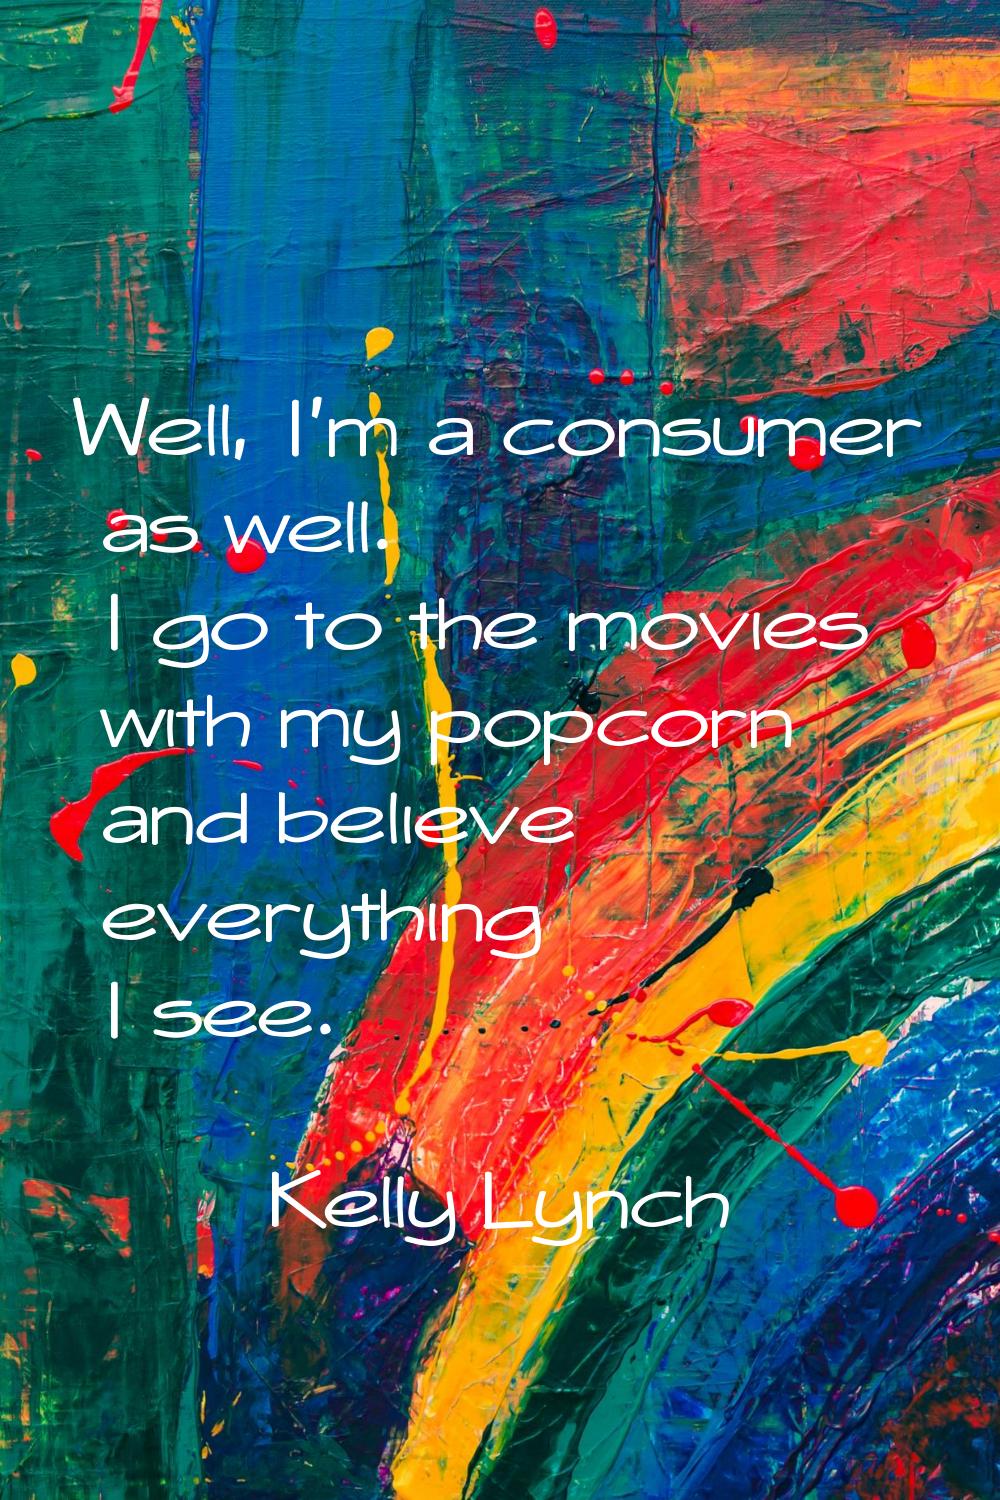 Well, I'm a consumer as well. I go to the movies with my popcorn and believe everything I see.